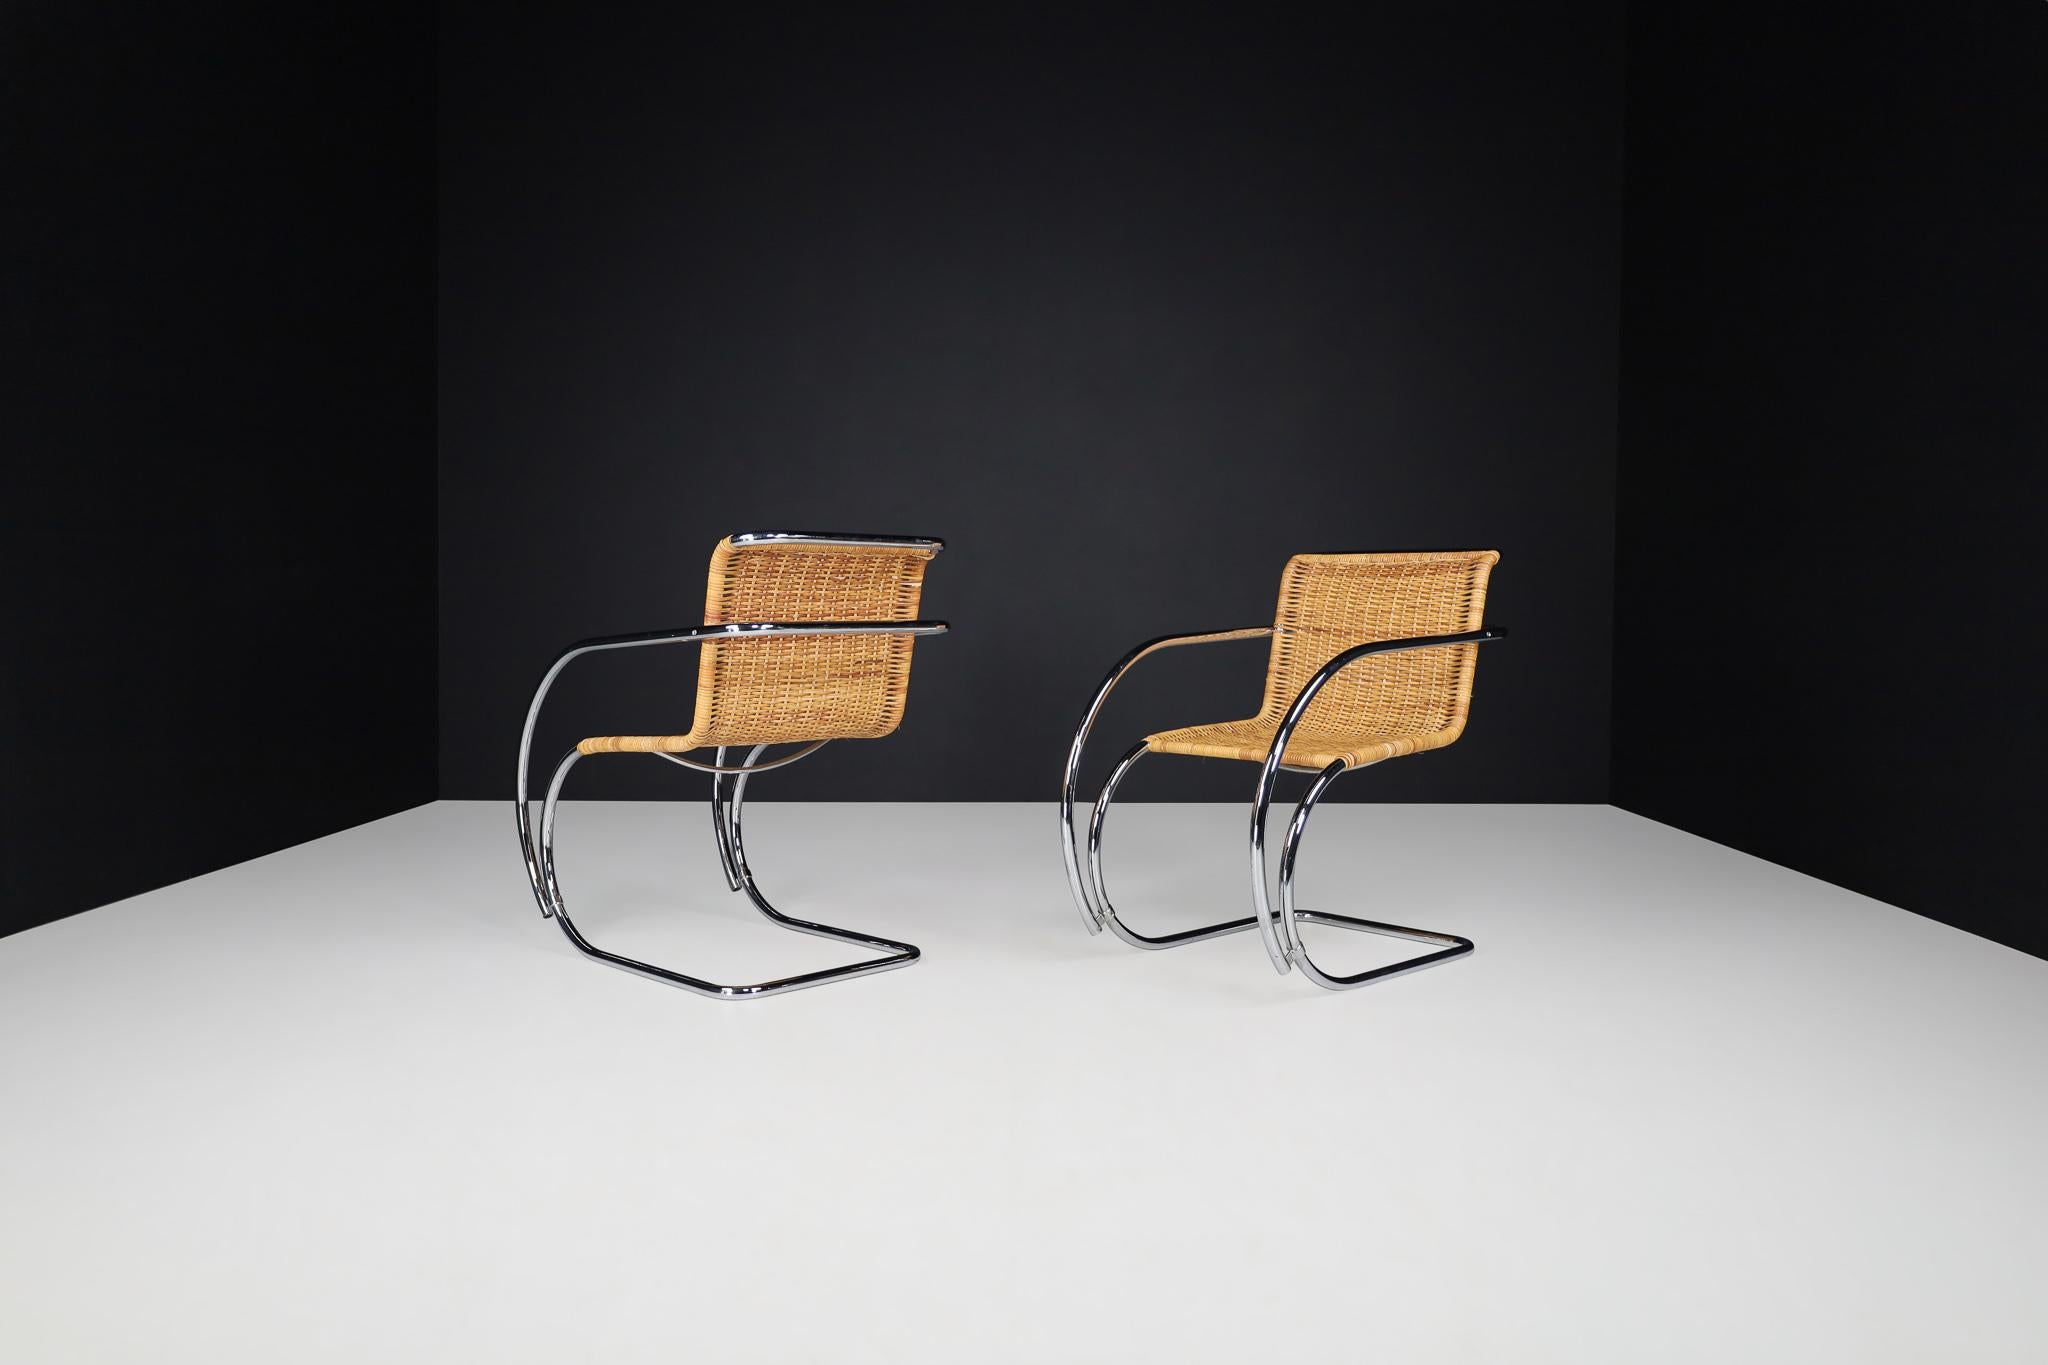  Mies Van Der Rohe MR20 Chrome & Wicker Lounge Chairs, 1970s  For Sale 3